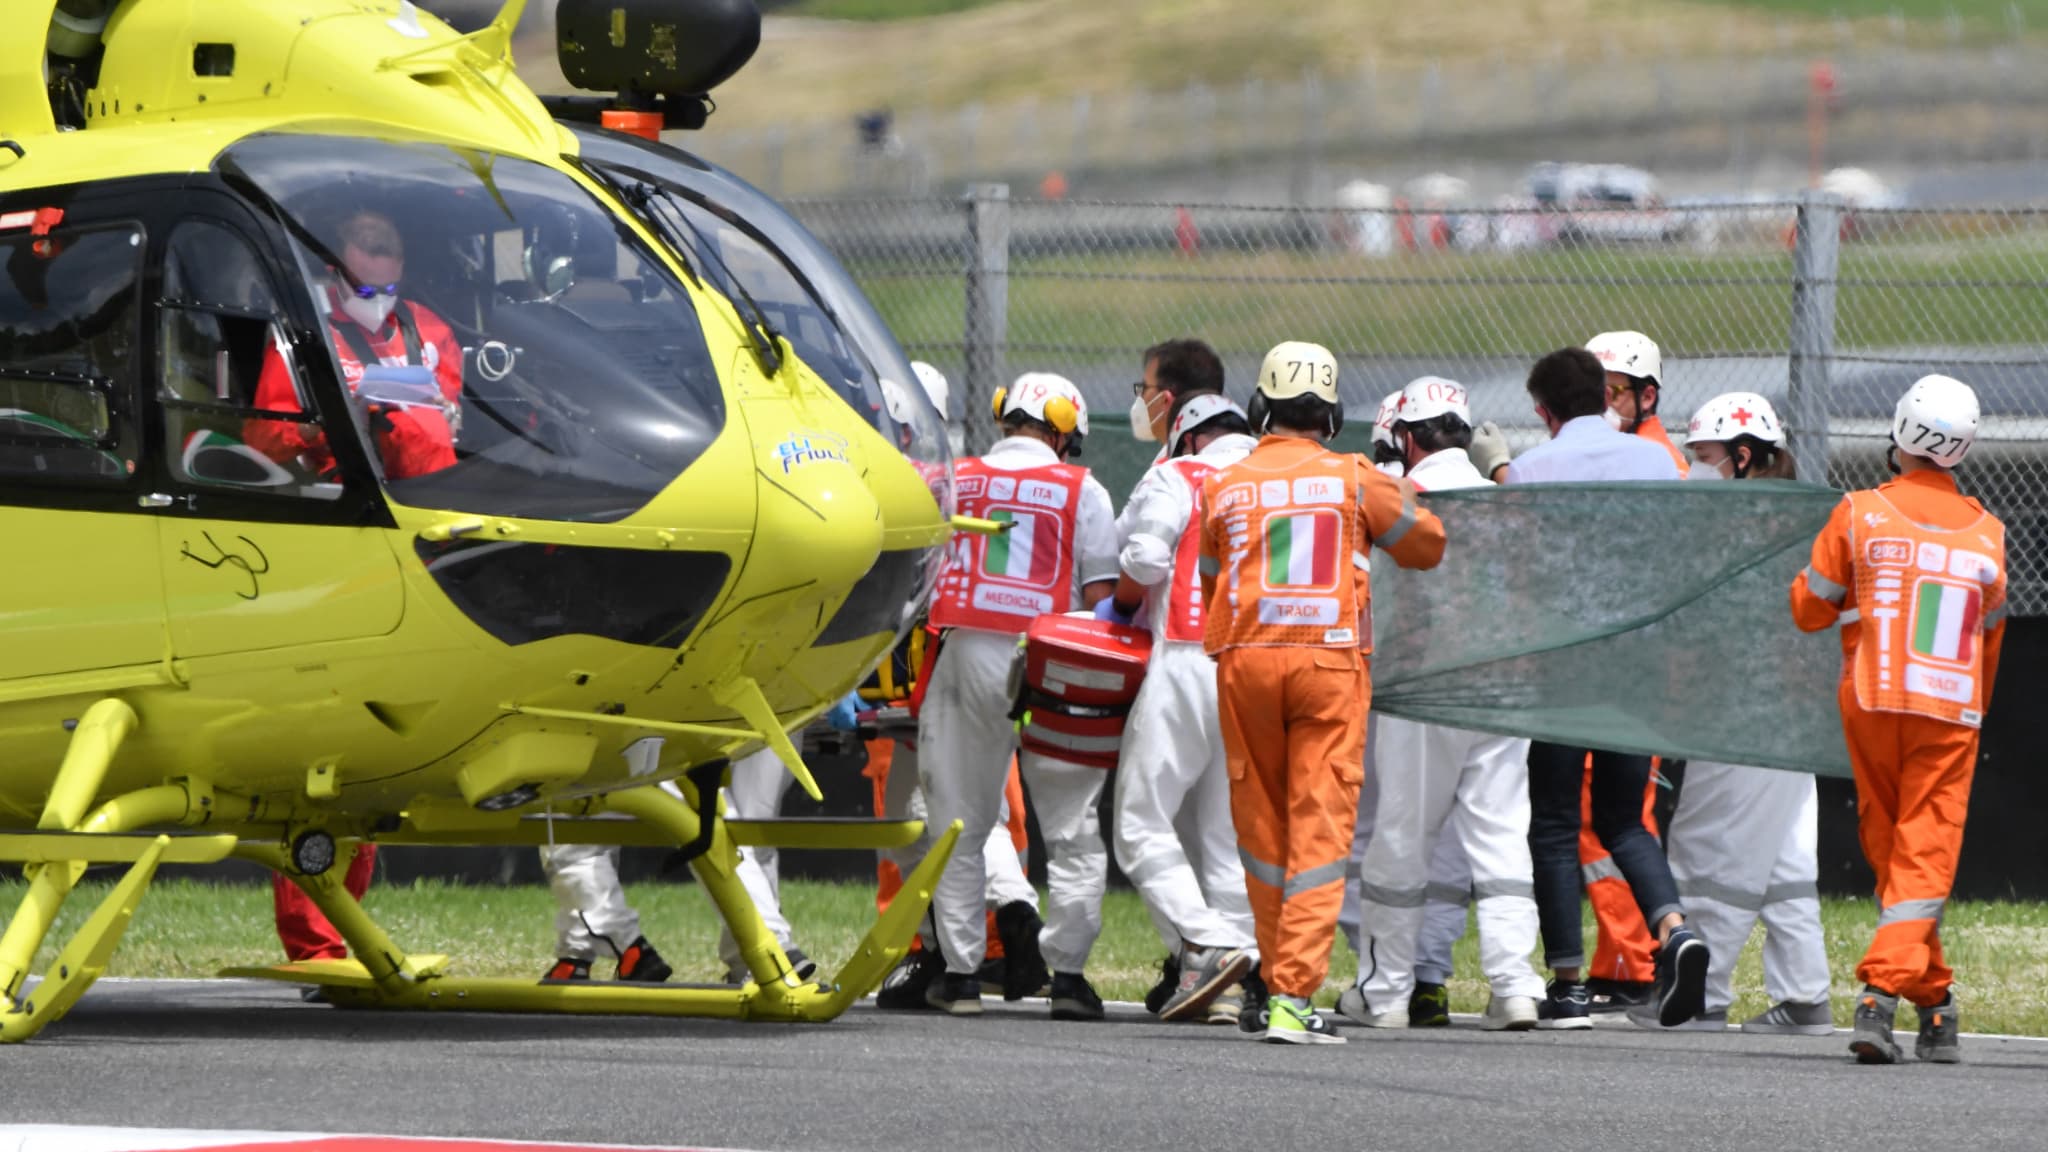 Moto3 (Italy): Swiss rider Jason Dupasquier "in serious condition" after his accident - The ...